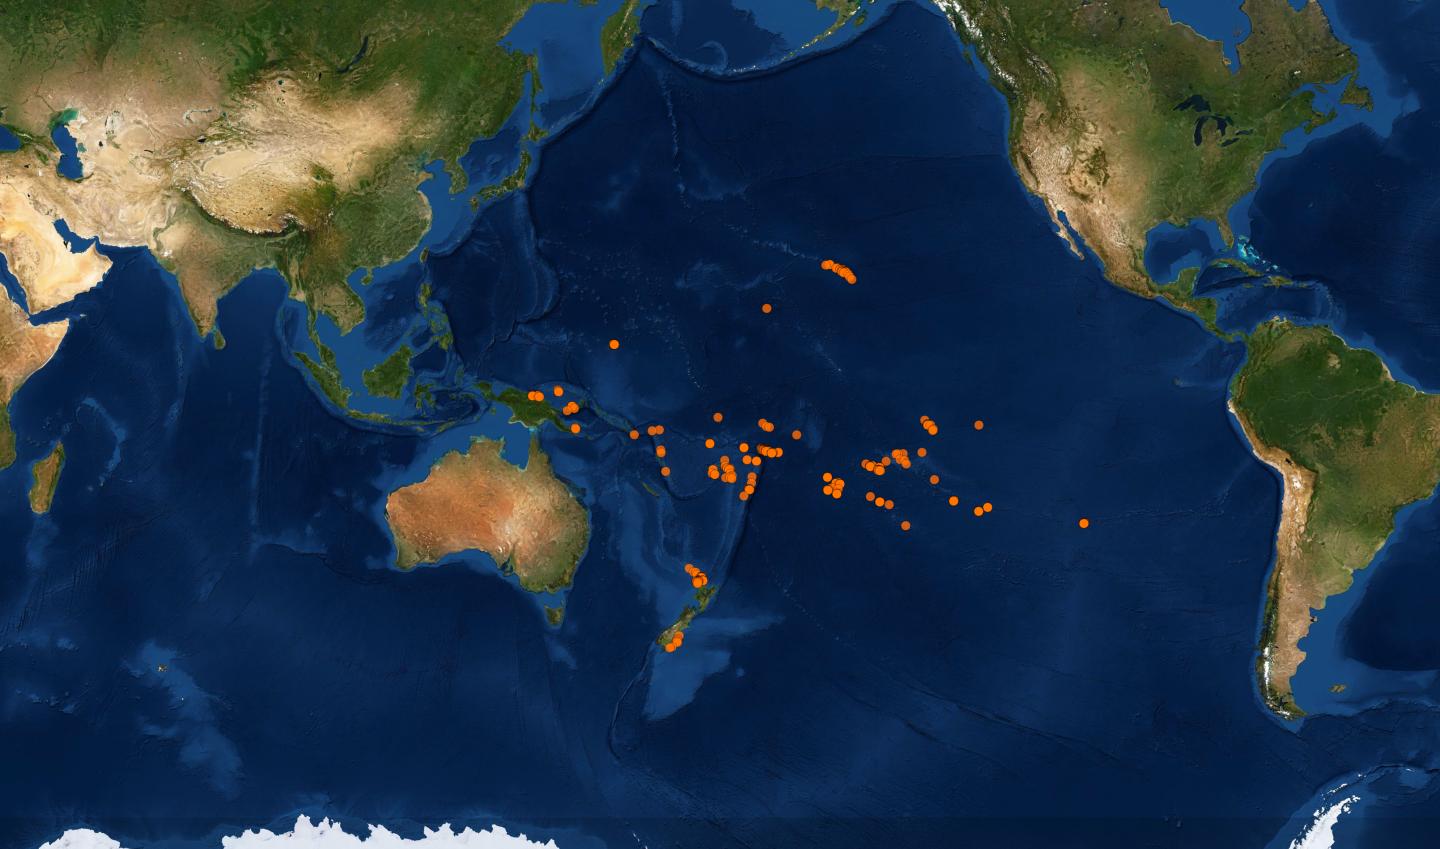 Locations of the 7759 samples already released in the Pofatu Database